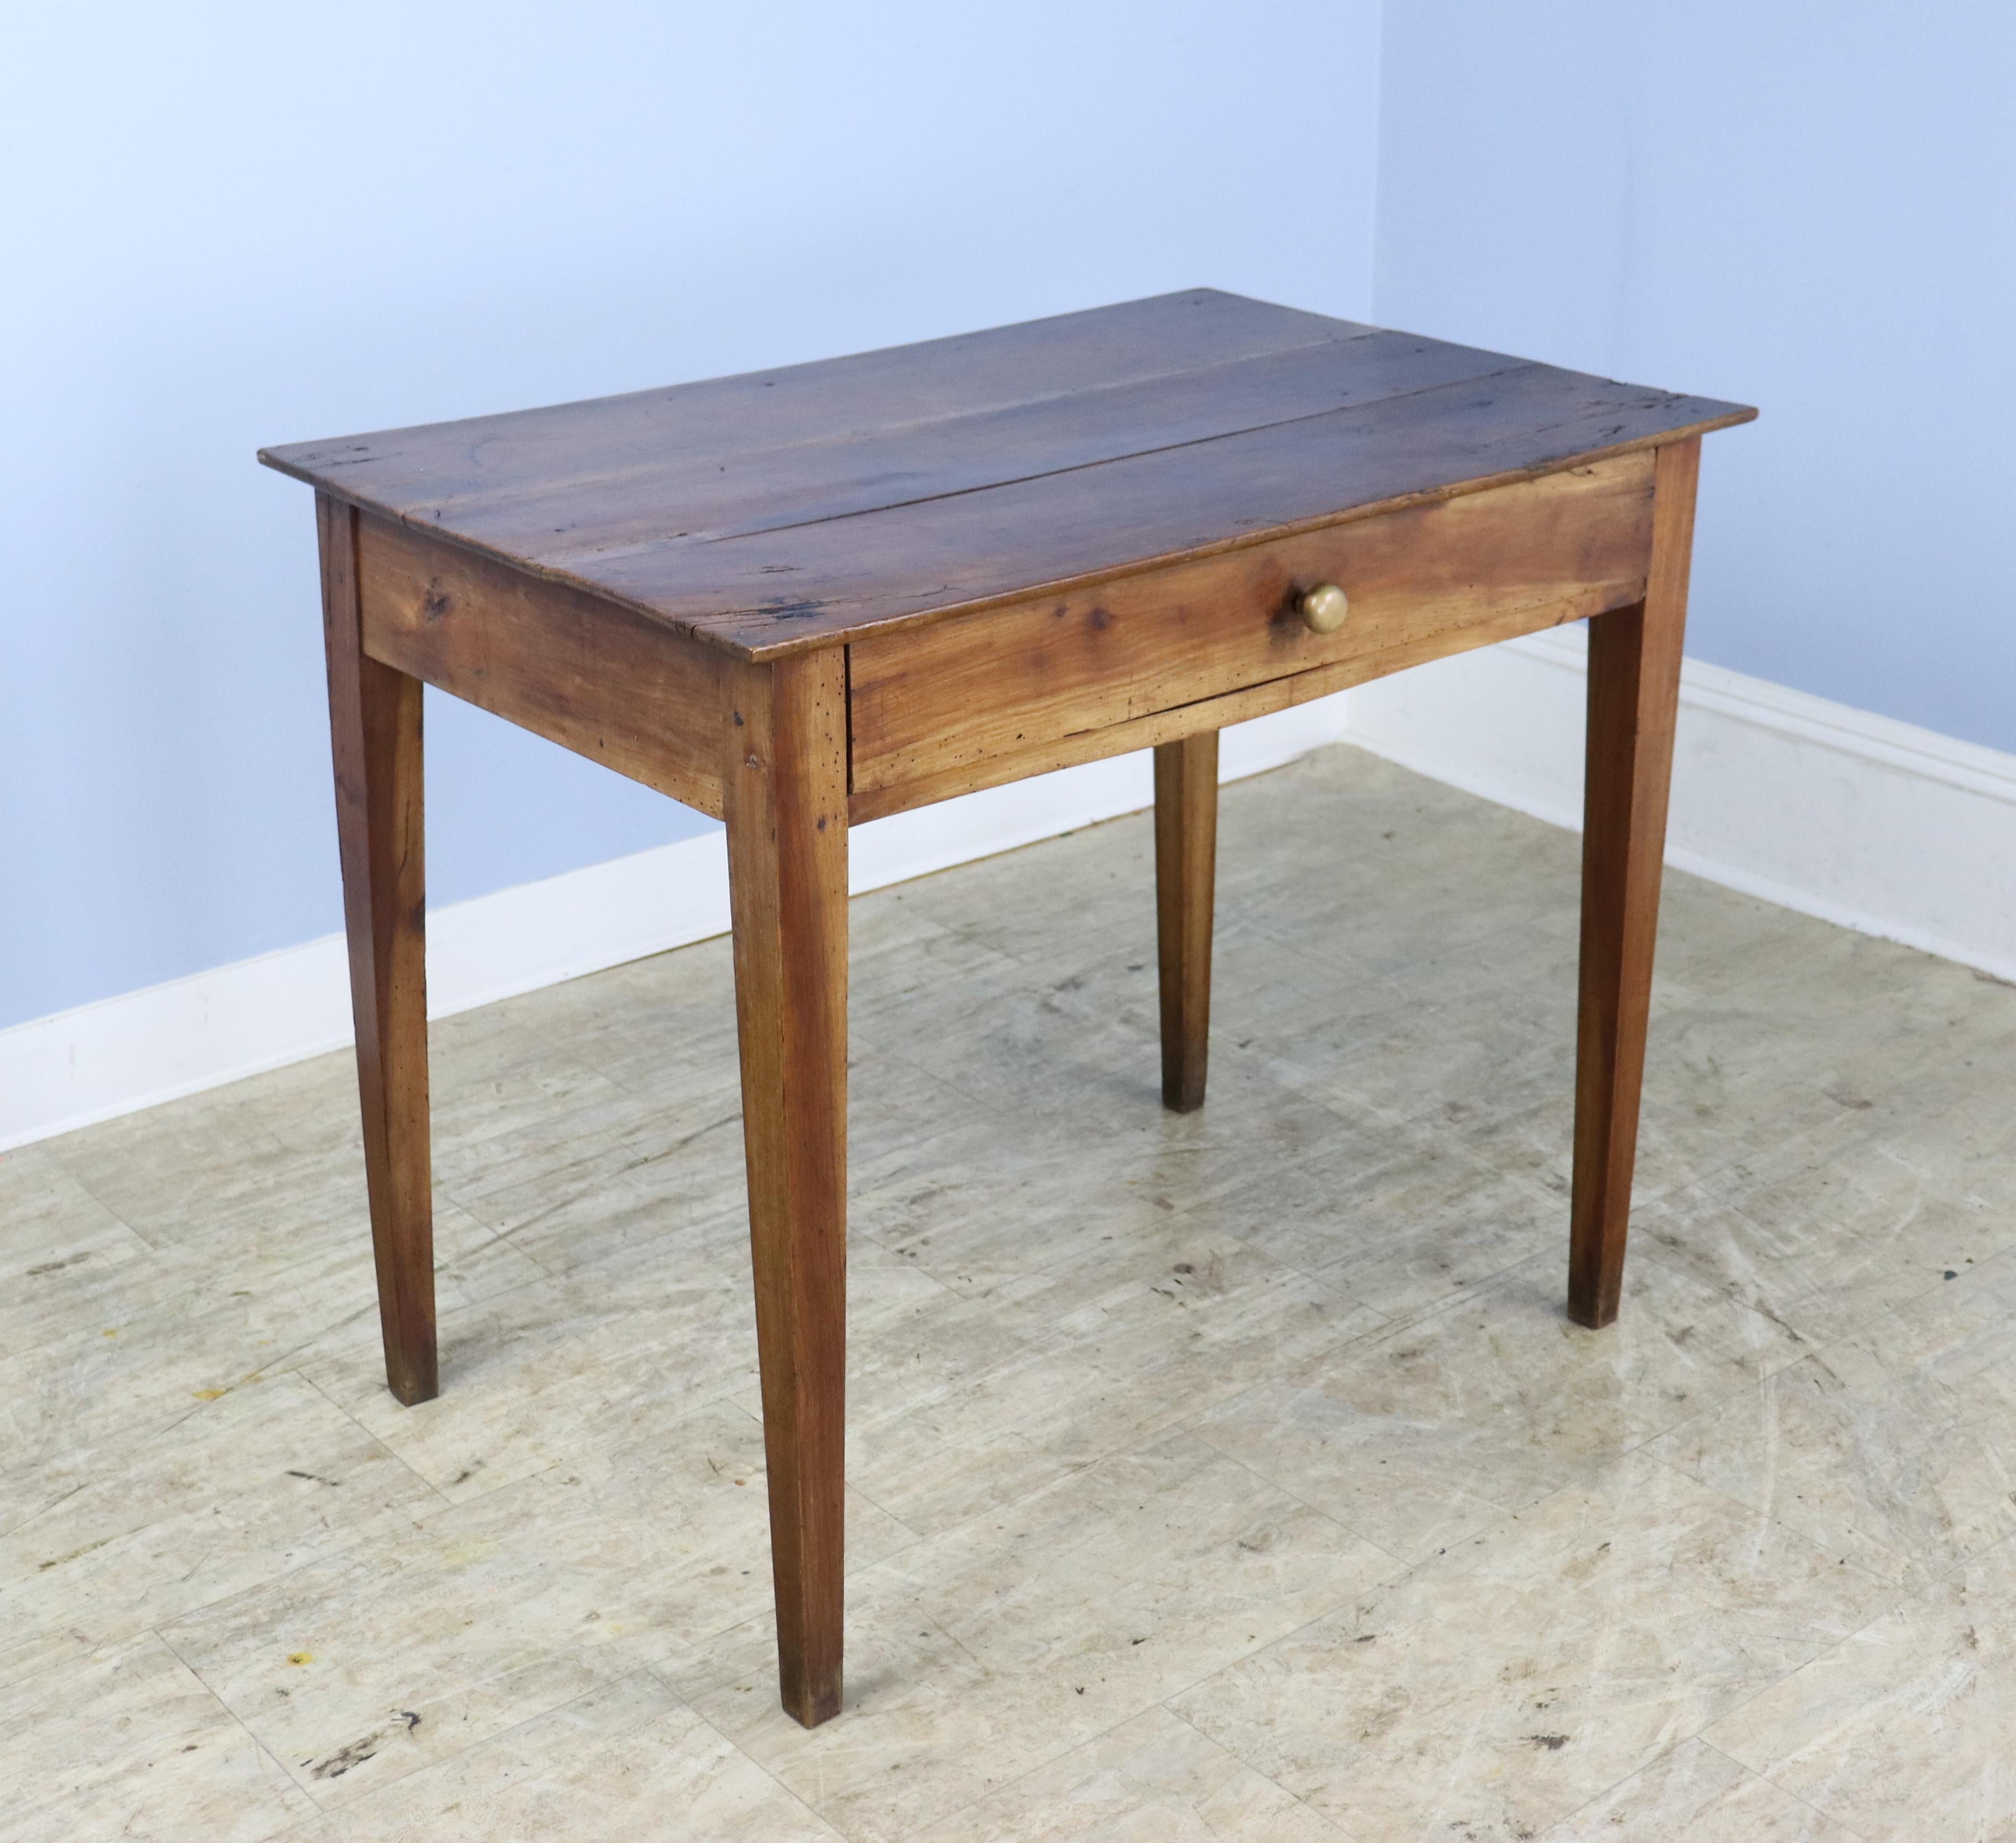 A mid 19th Century side table in warm cherry with classic tapered legs.  The top has good distress and character, well patinated over the years.  Single drawer slides easily.  